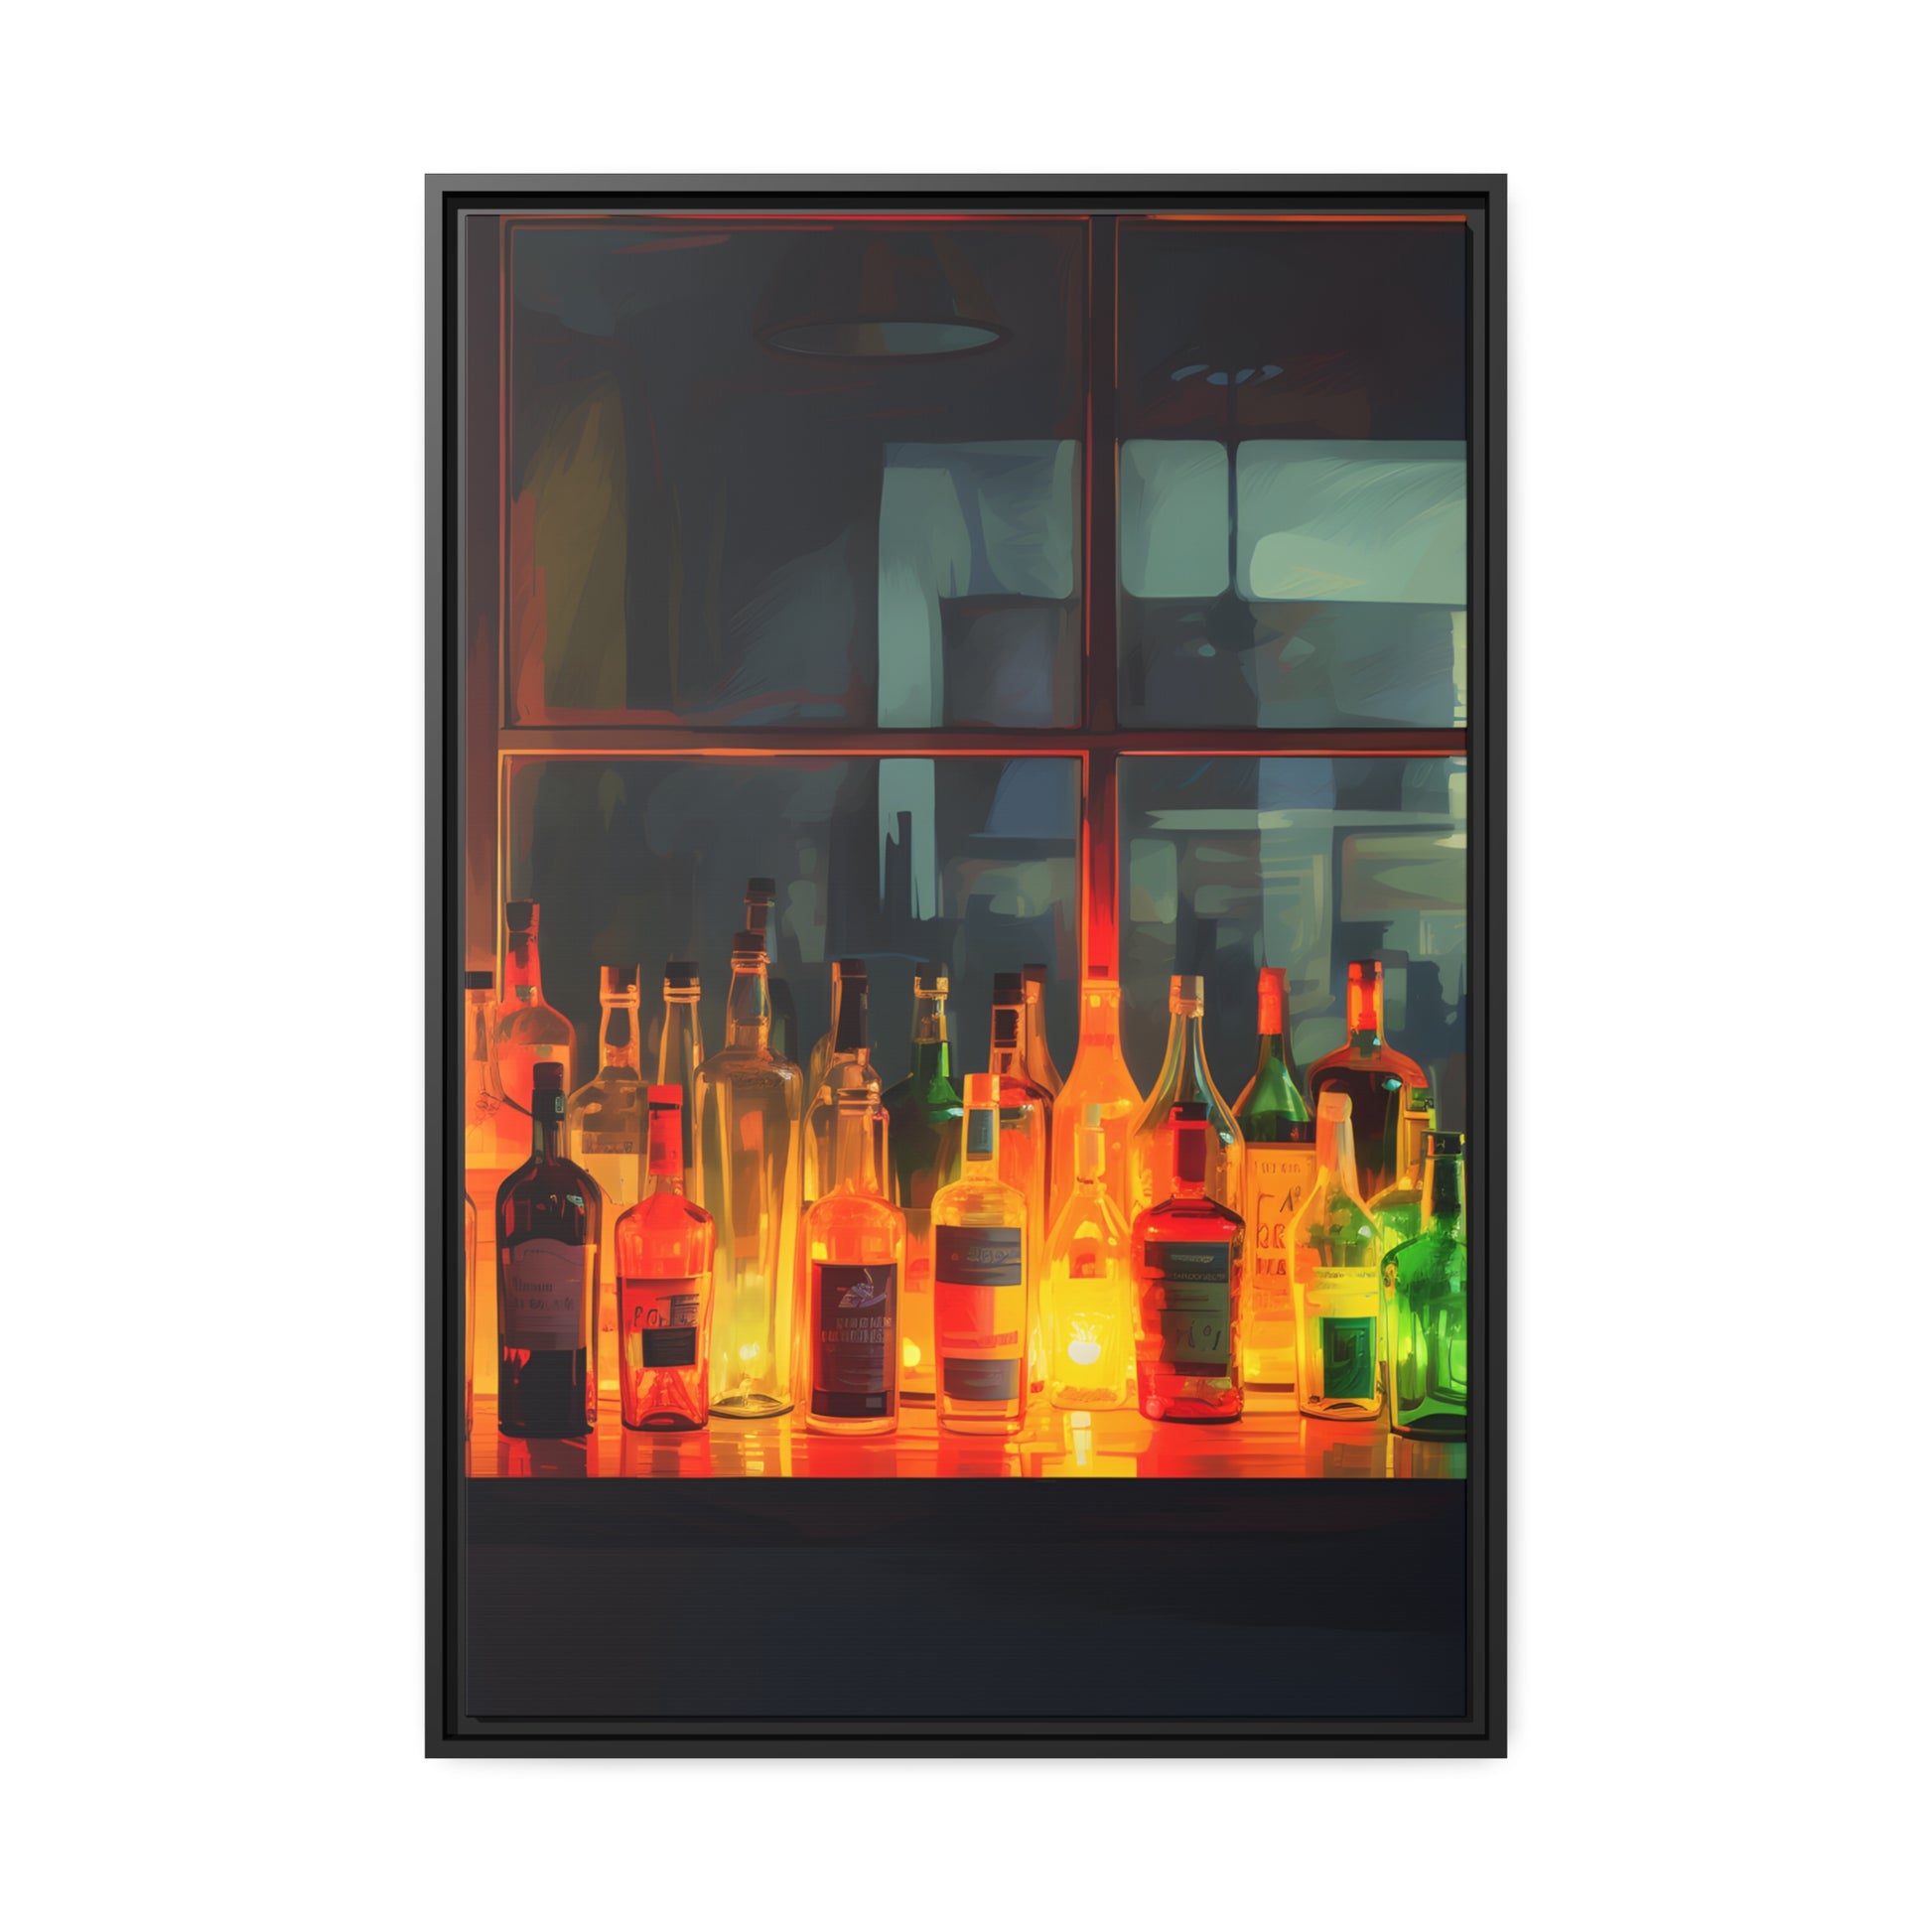 Framed Canvas Artwork Alcohol Bar Night Life Vibrant Colorful Well Lit Bar With Alcohol Bottles Lined UpParty Drinking Lifestyle Floating Frame Canvas 